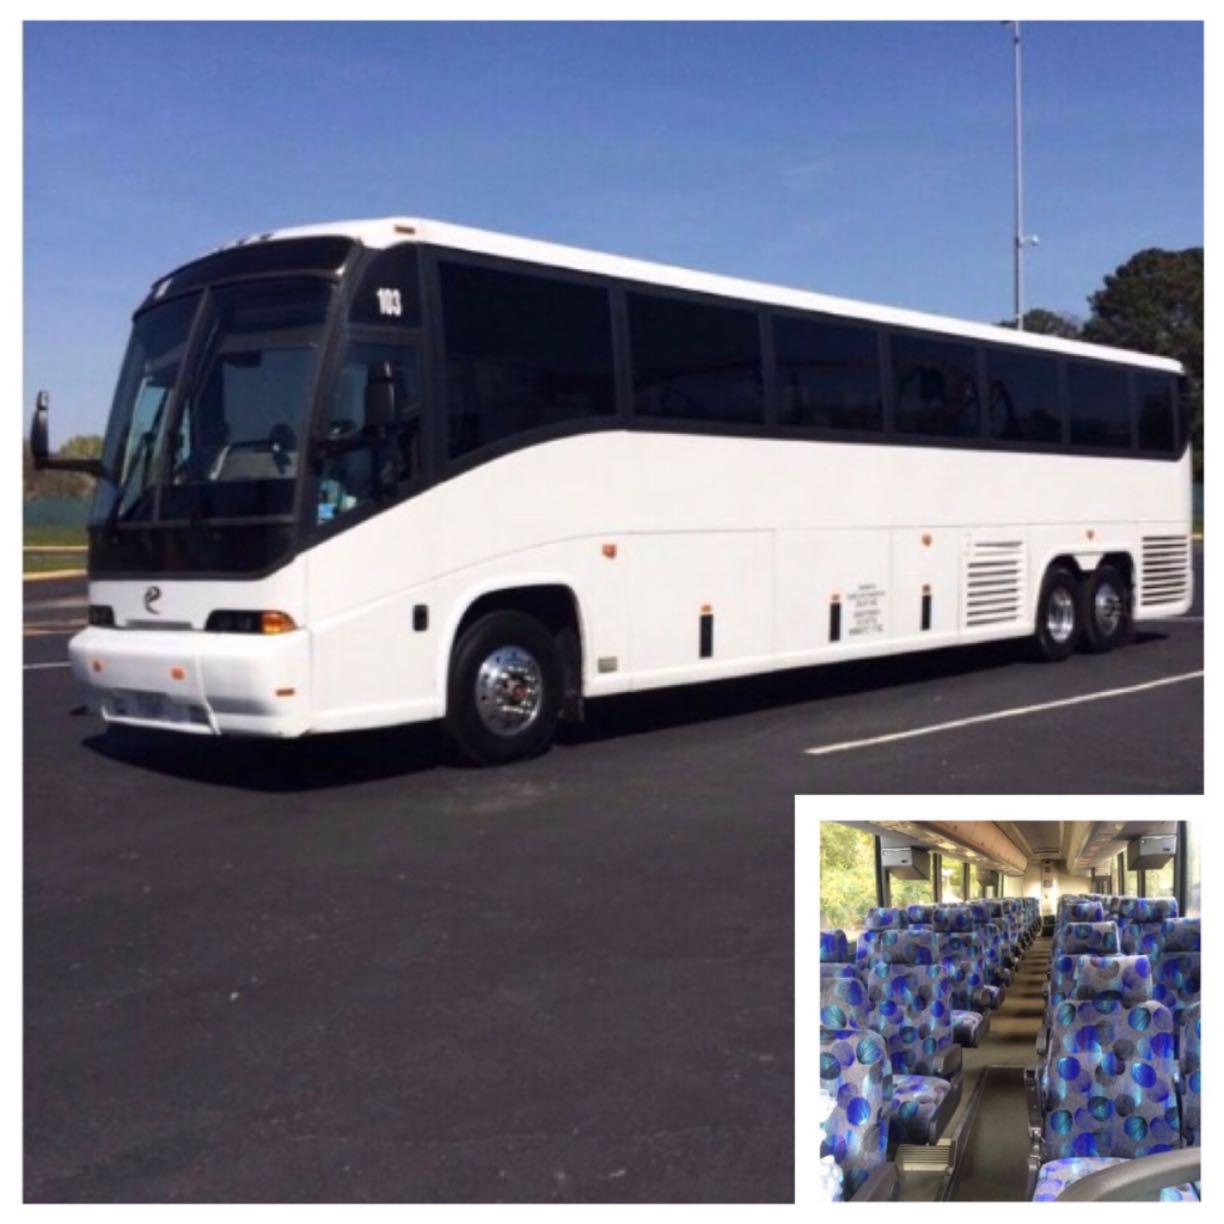 Charter a Bus for theater trips, ski trips, shopping trips, sports events, wine tours and brewery tours.